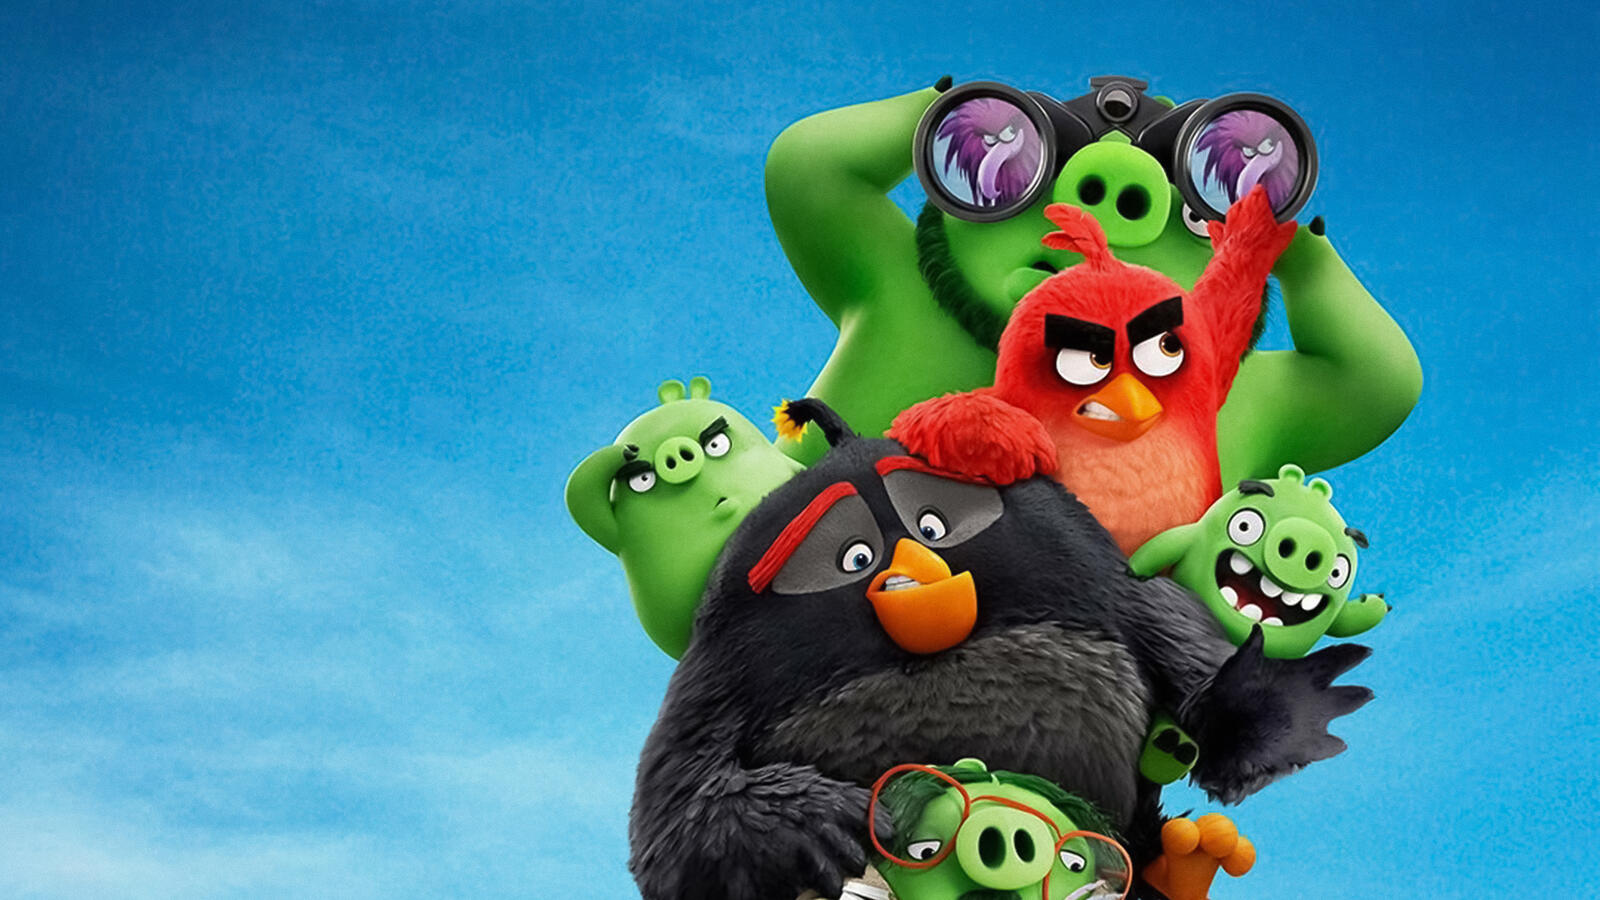 Wallpapers angry birds The Angry Birds 2 cartoons on the desktop